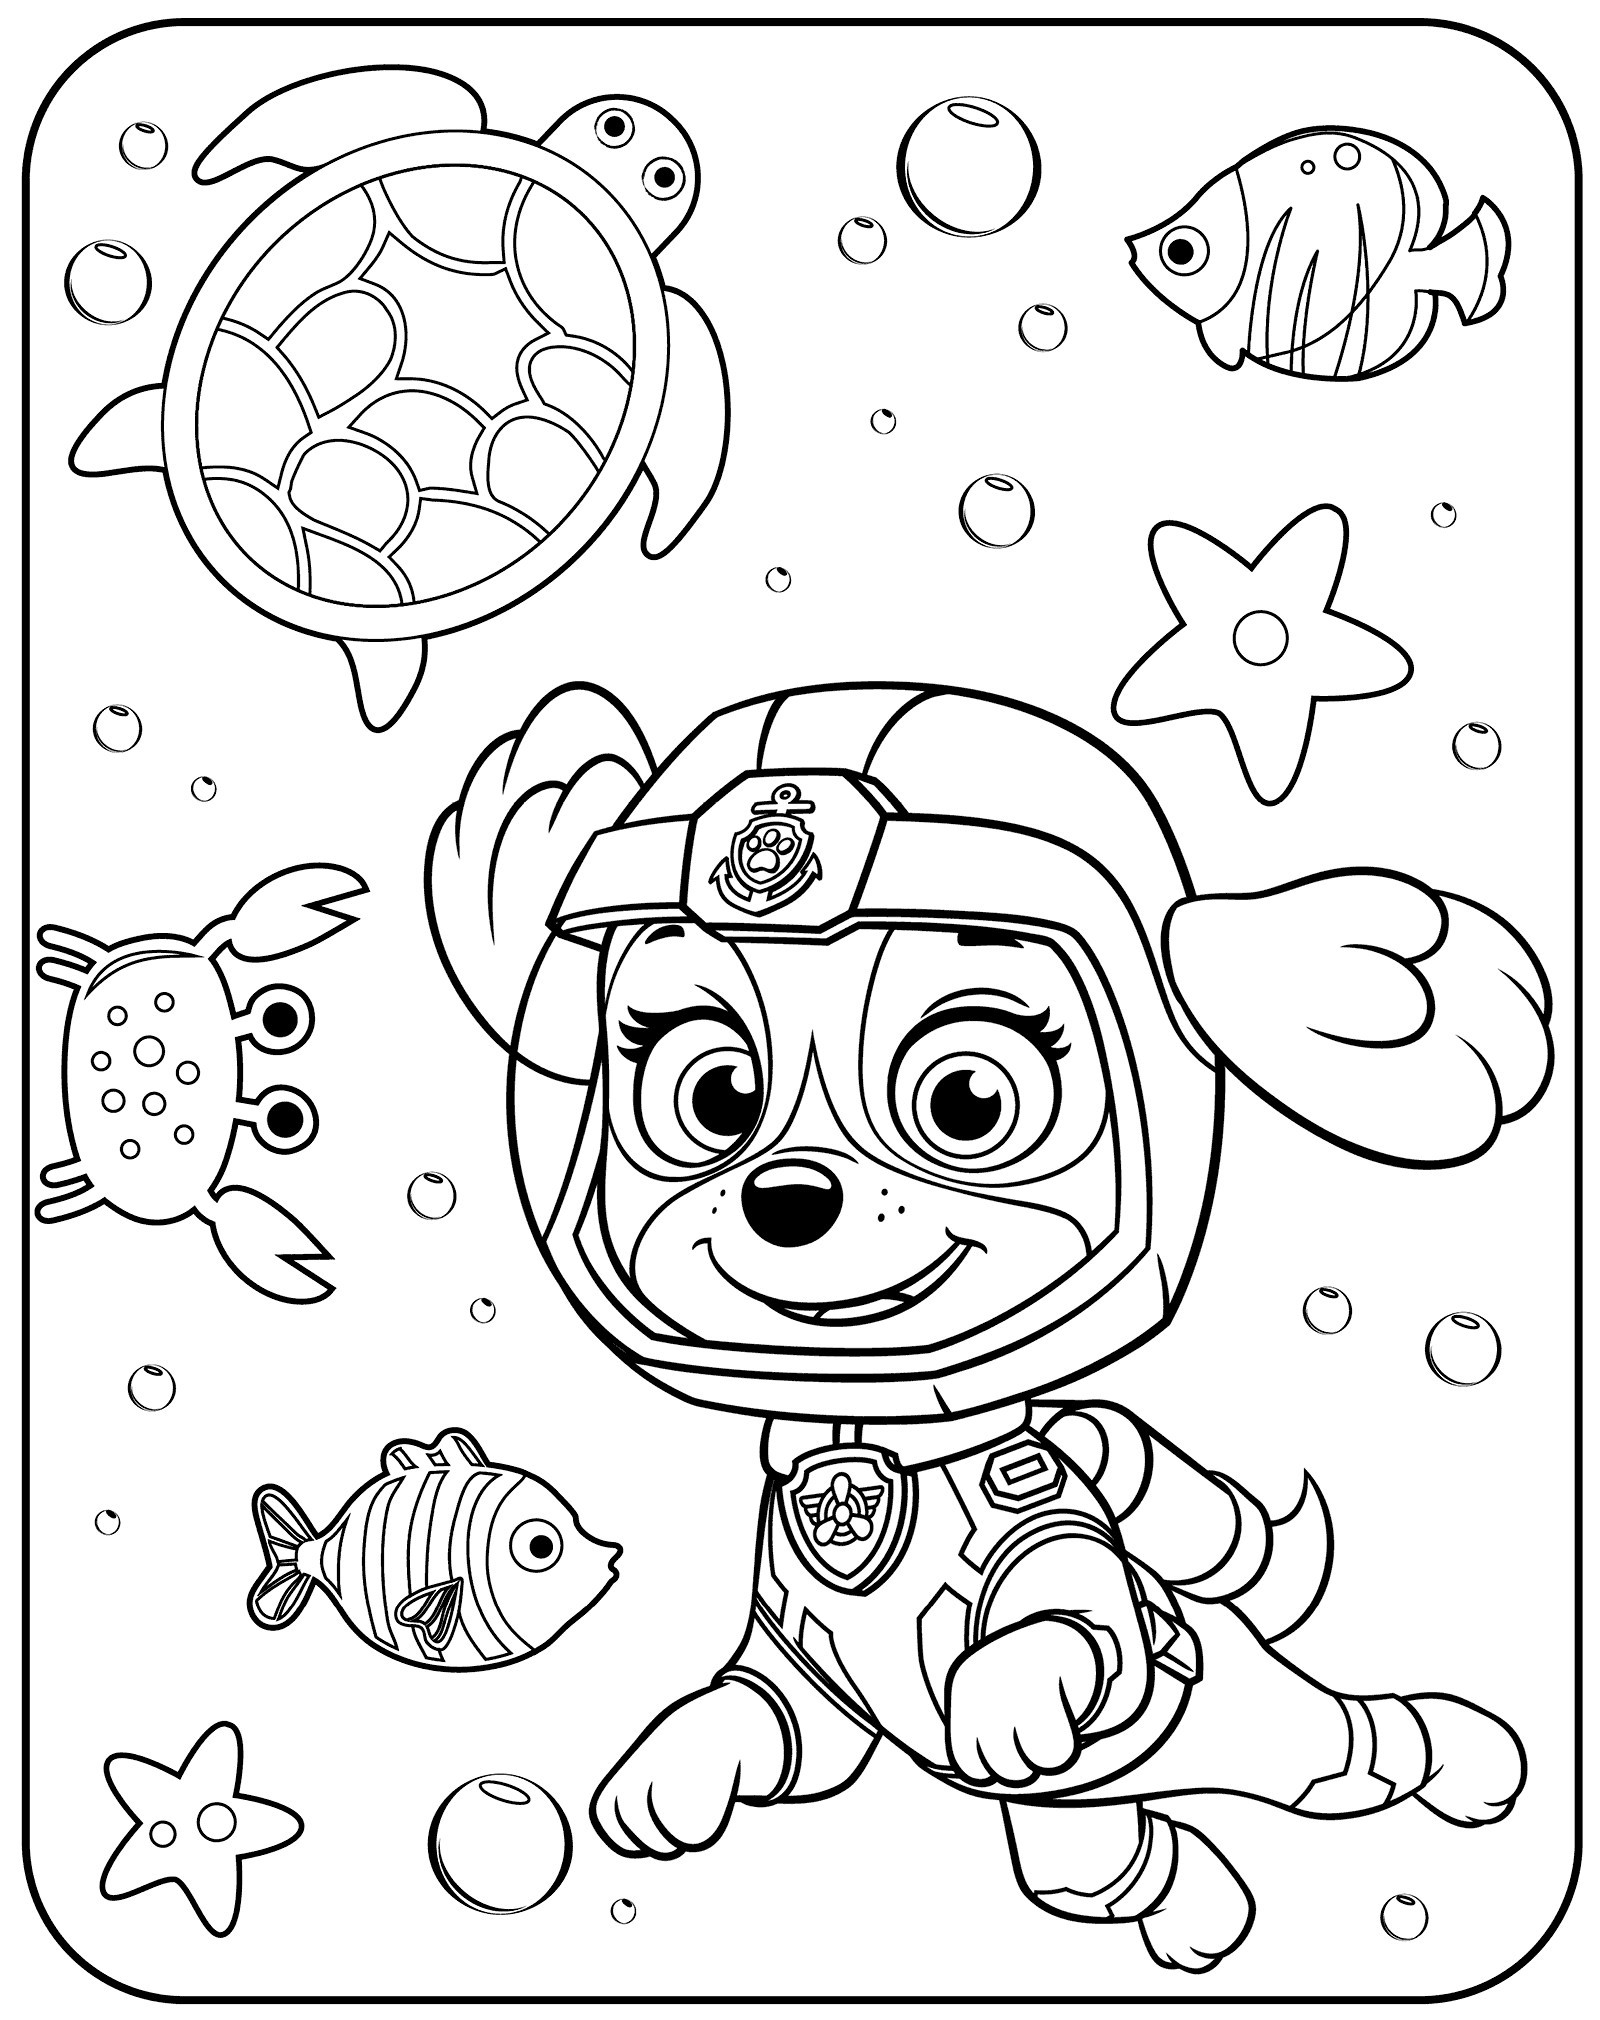 Download Nintendo Switch Coloring Pages - Coloring Home